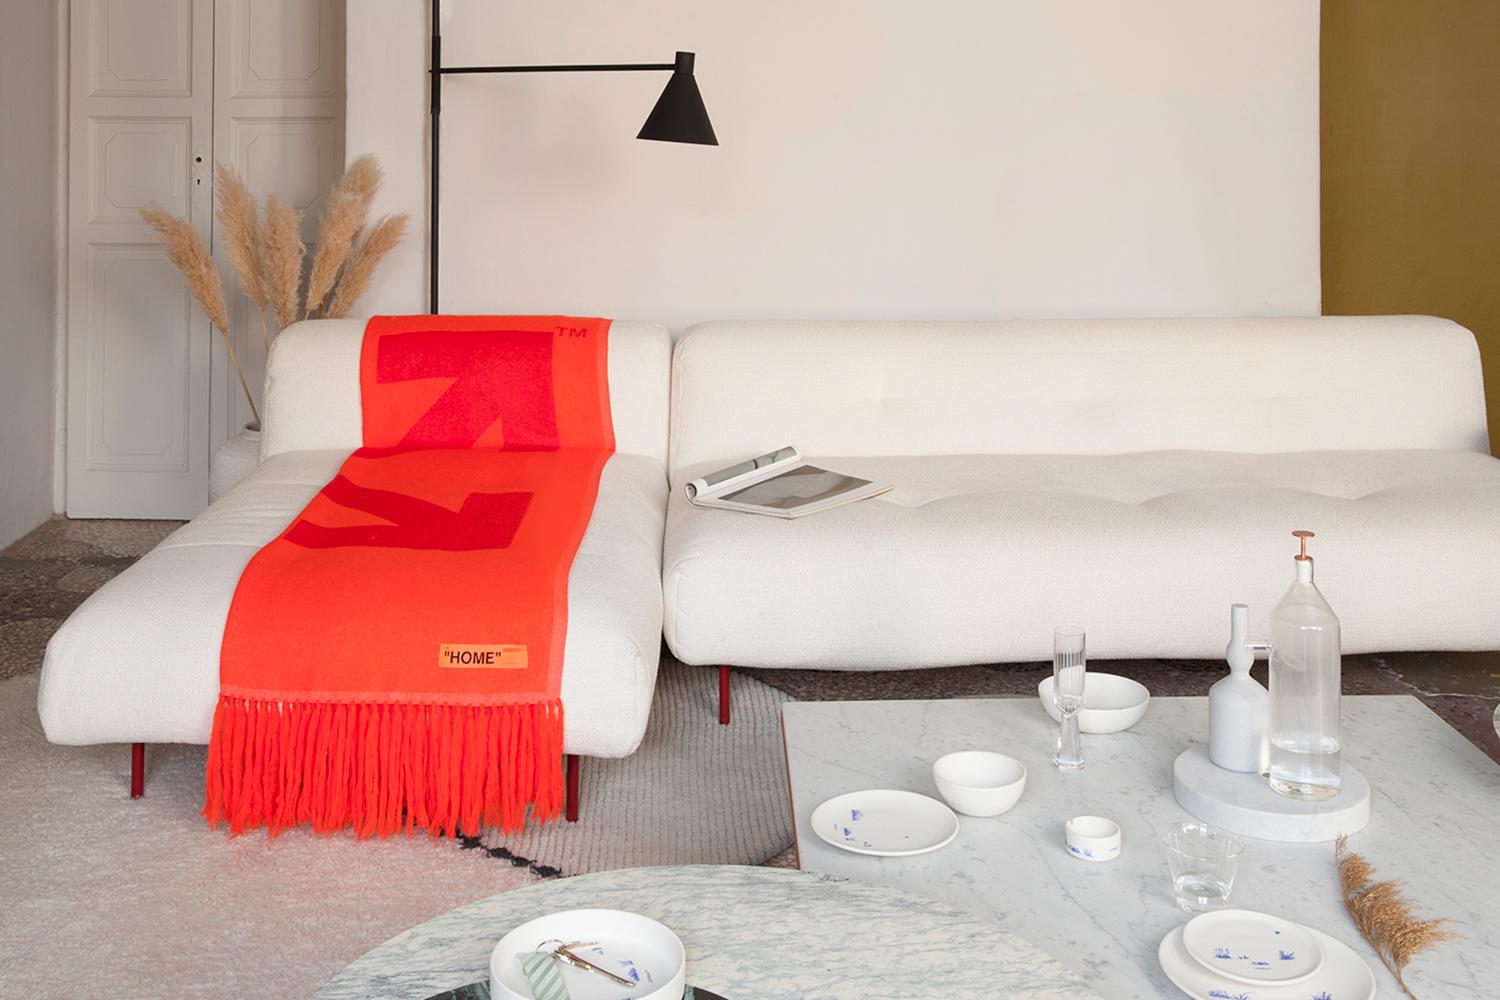 Virgil Abloh Debuts Off-White “HOME” So You Can Now Dress Your Flat in the Cult Streetwear Label 